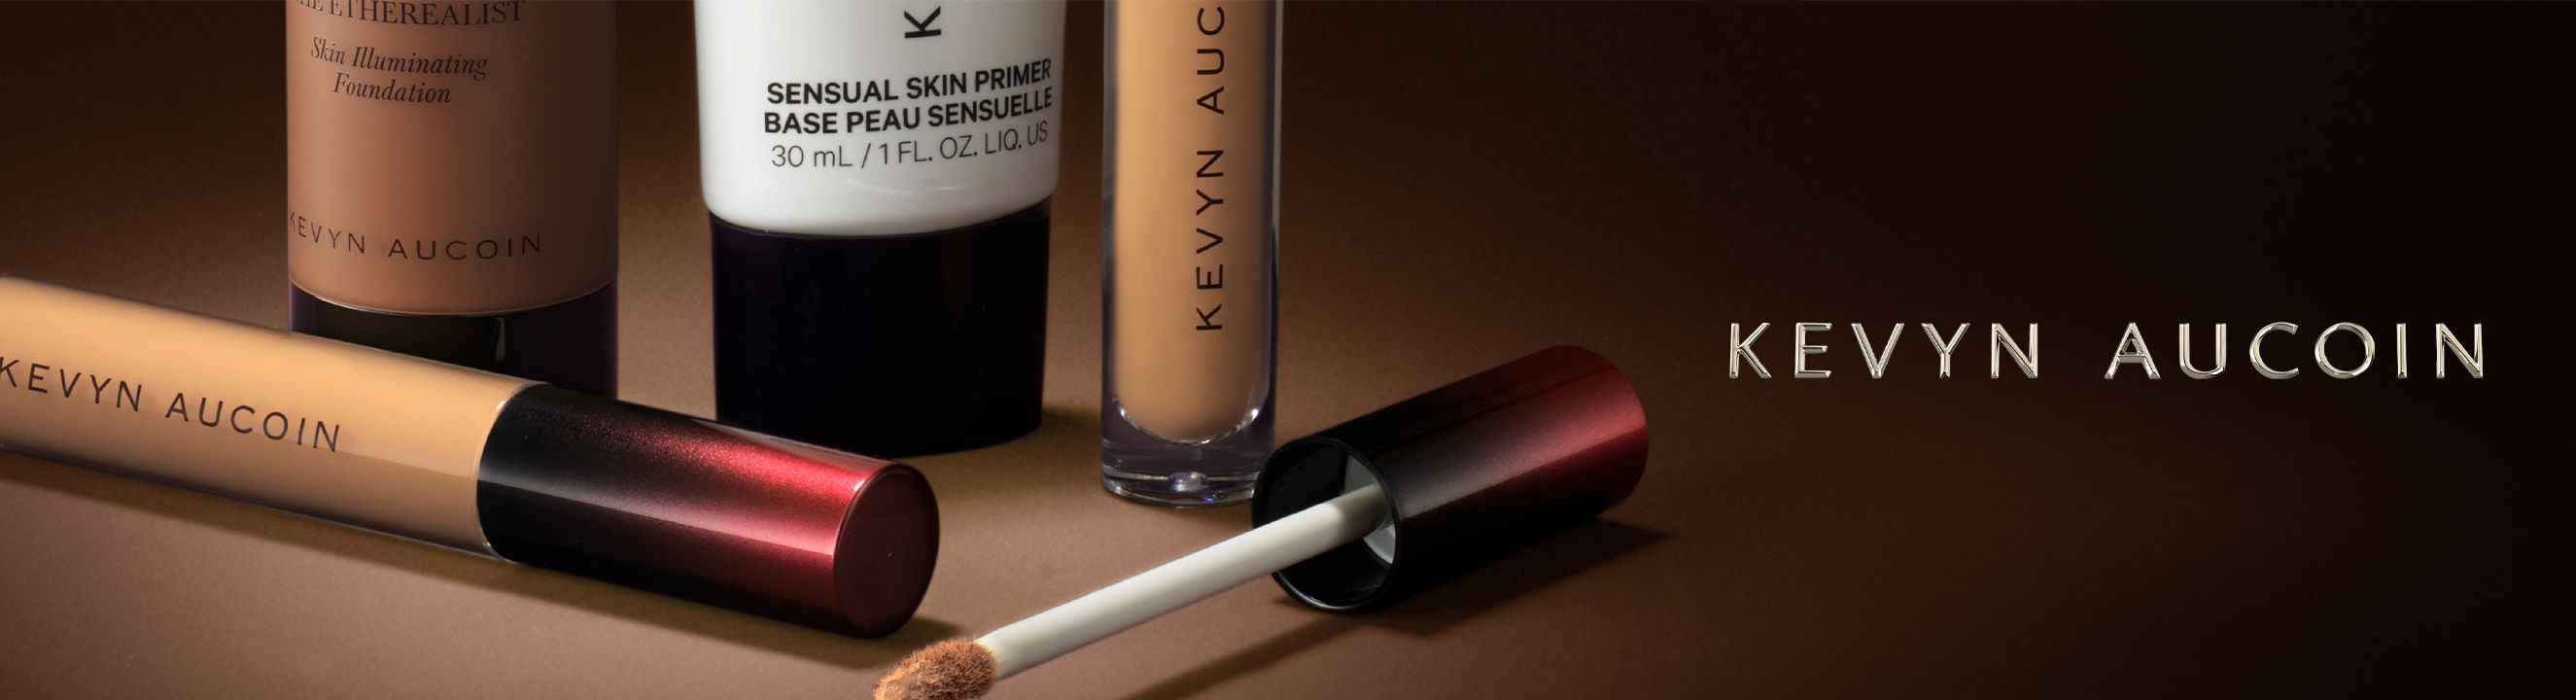 kevyn-aucoin-collection